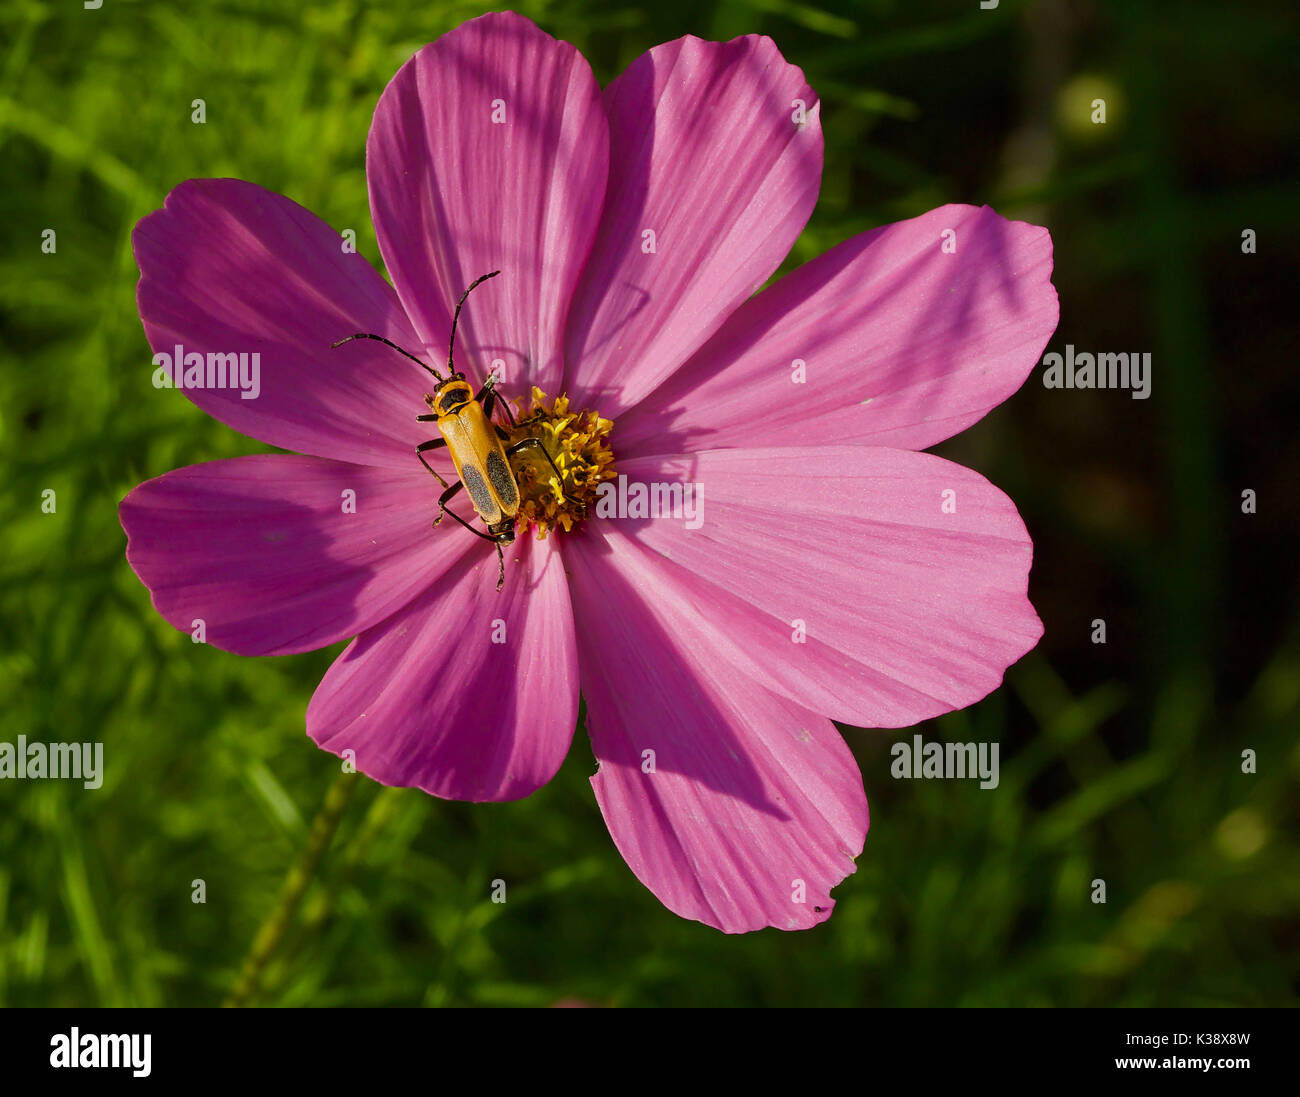 Pink daisy with Pennsylvania Leather Wing Beetle Stock Photo